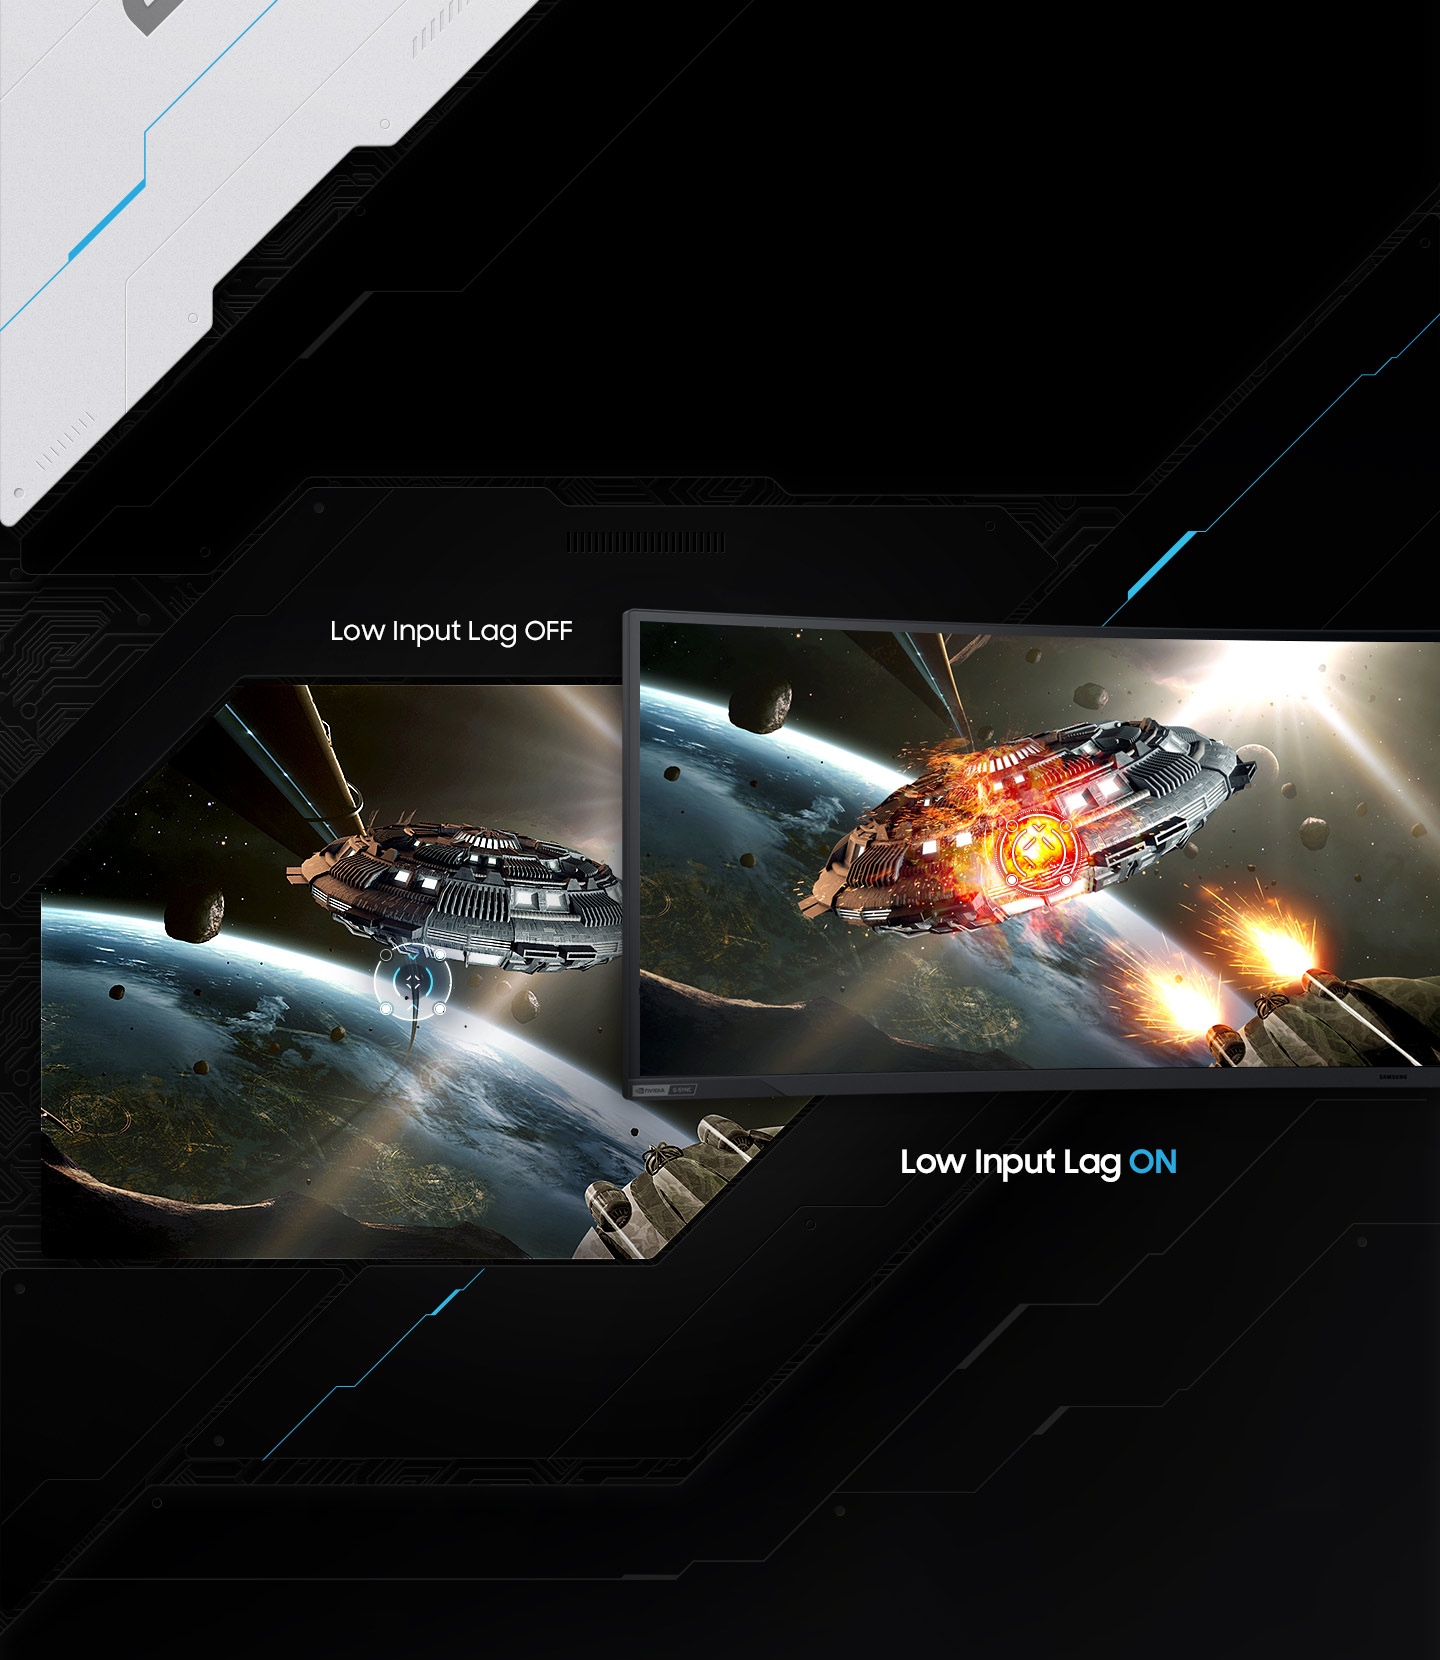 Two screens are shown side-by-side both with starships aiming their guns at another starship flying over an unknown planet. On the right the starship has successfully fired and shows †Low input Lag ON' but on the left the starship has yet to fire and shows †Low input Lag off.'